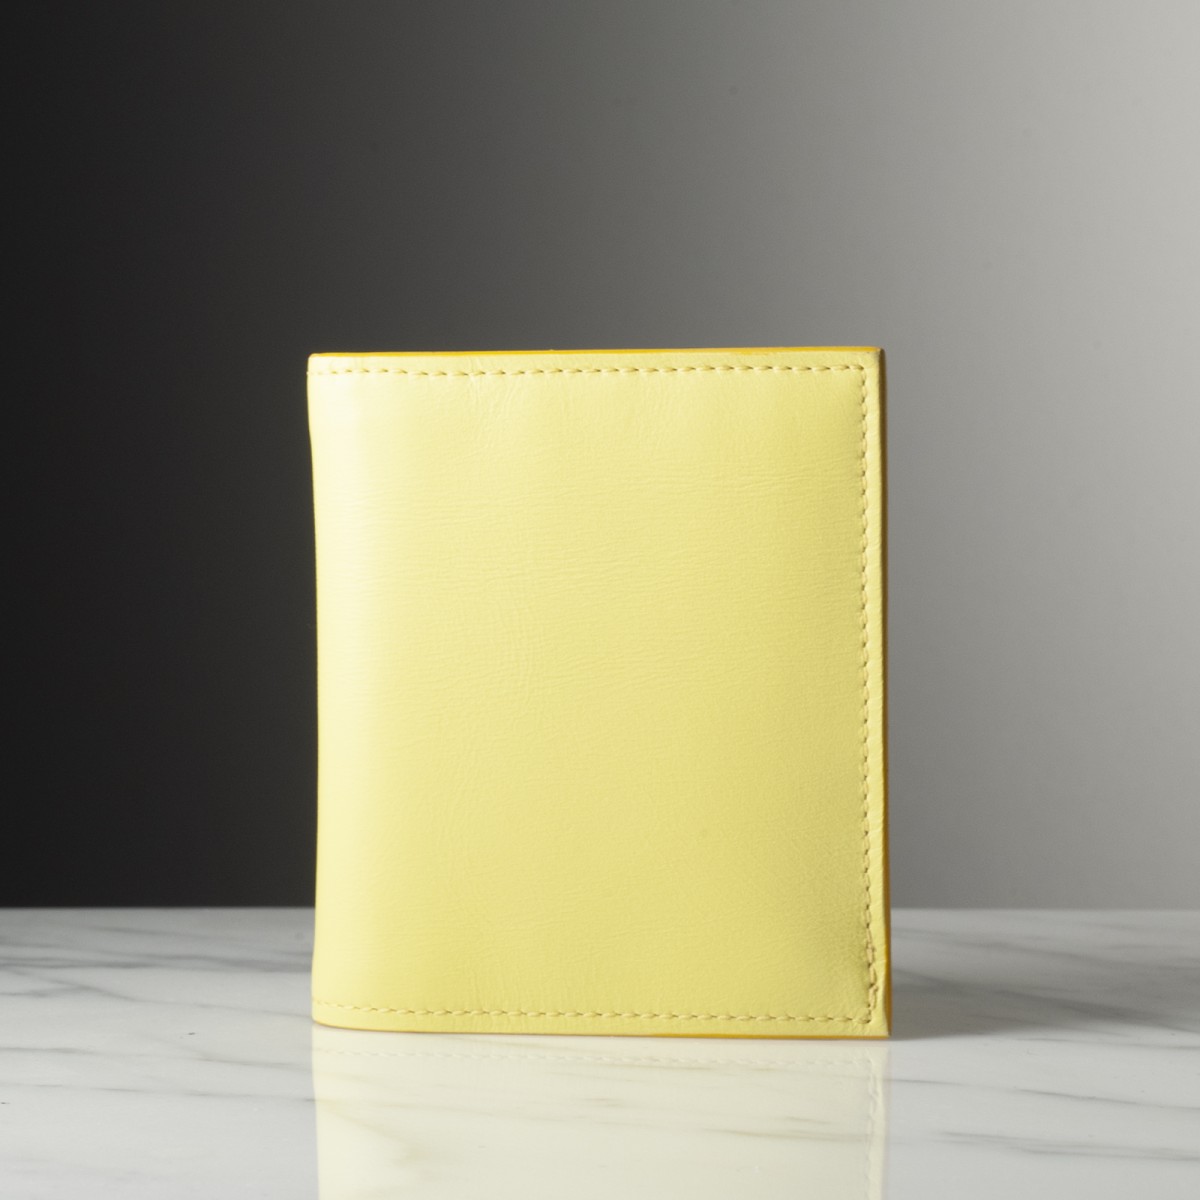 MARCO - Calfskin leather wallet, handmade in Italy